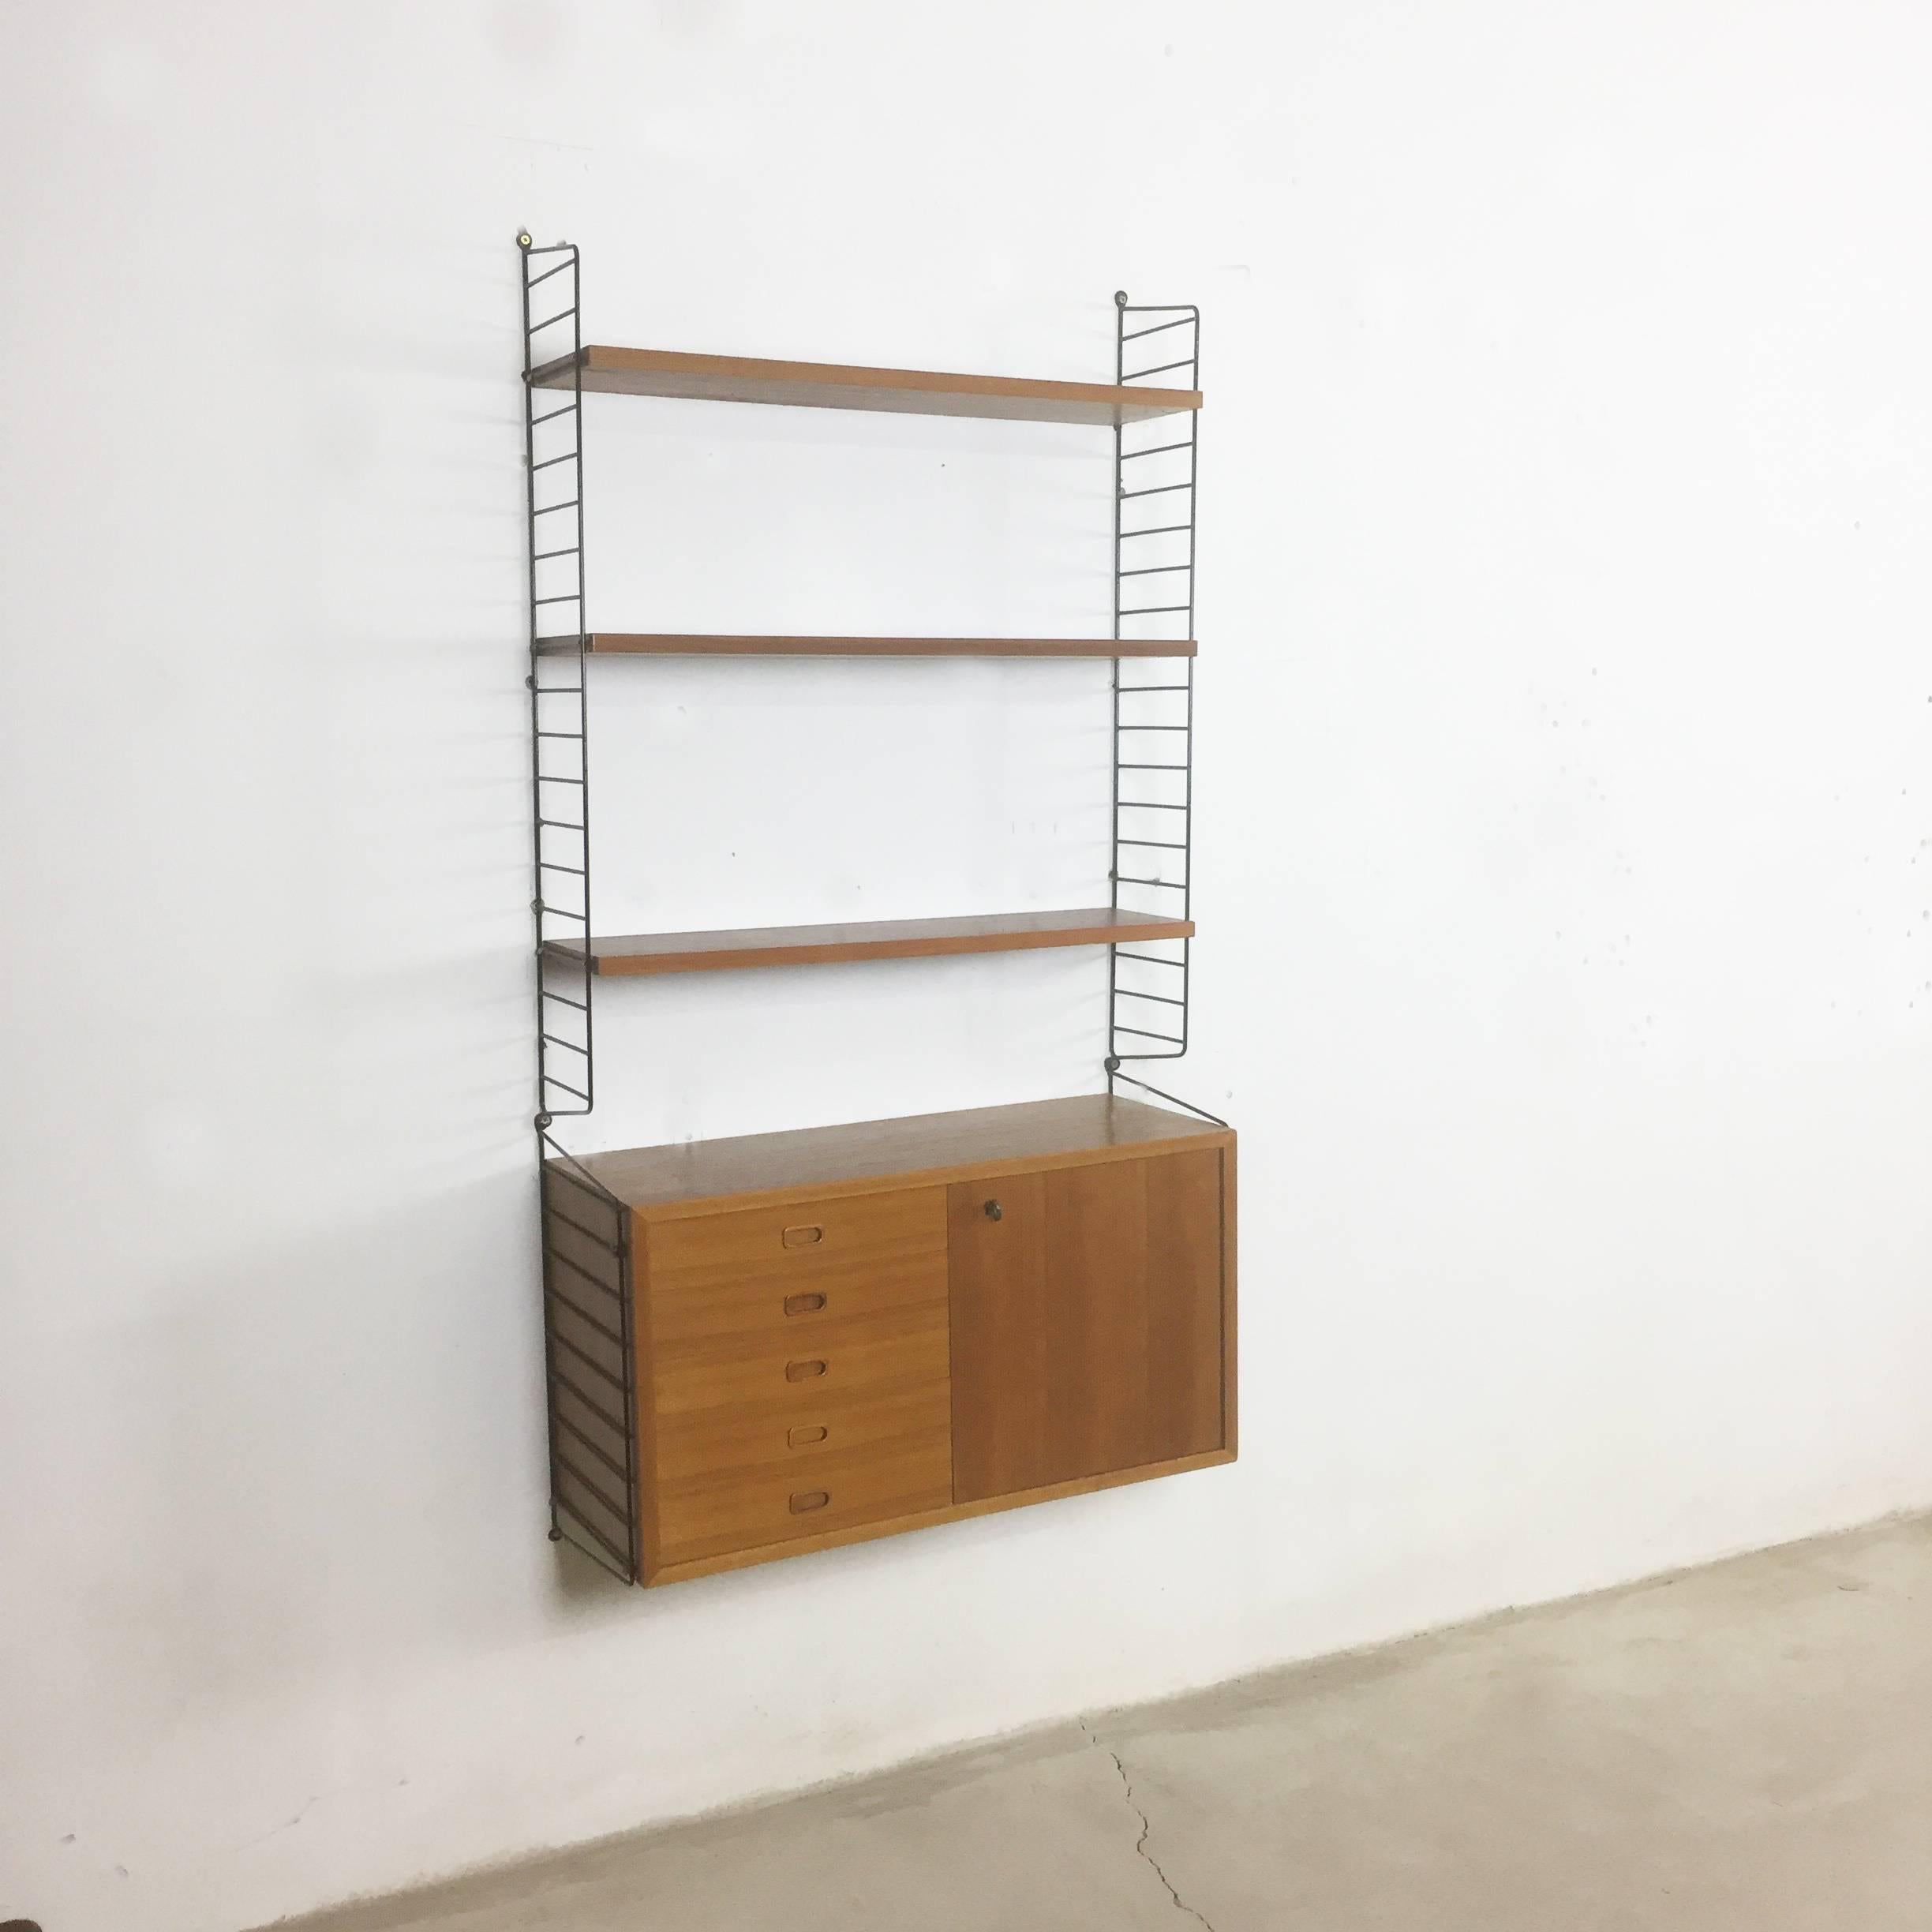 String Regal wall unit

Made in Sweden

Bokhyllan ’The Ladder Shelf’

Design: Nils und Kajsa Strinning, 1949

The architect Nisse Strinning was born in 1917. From 1940-1947 he studied architecture in Stockholm, before he designed the